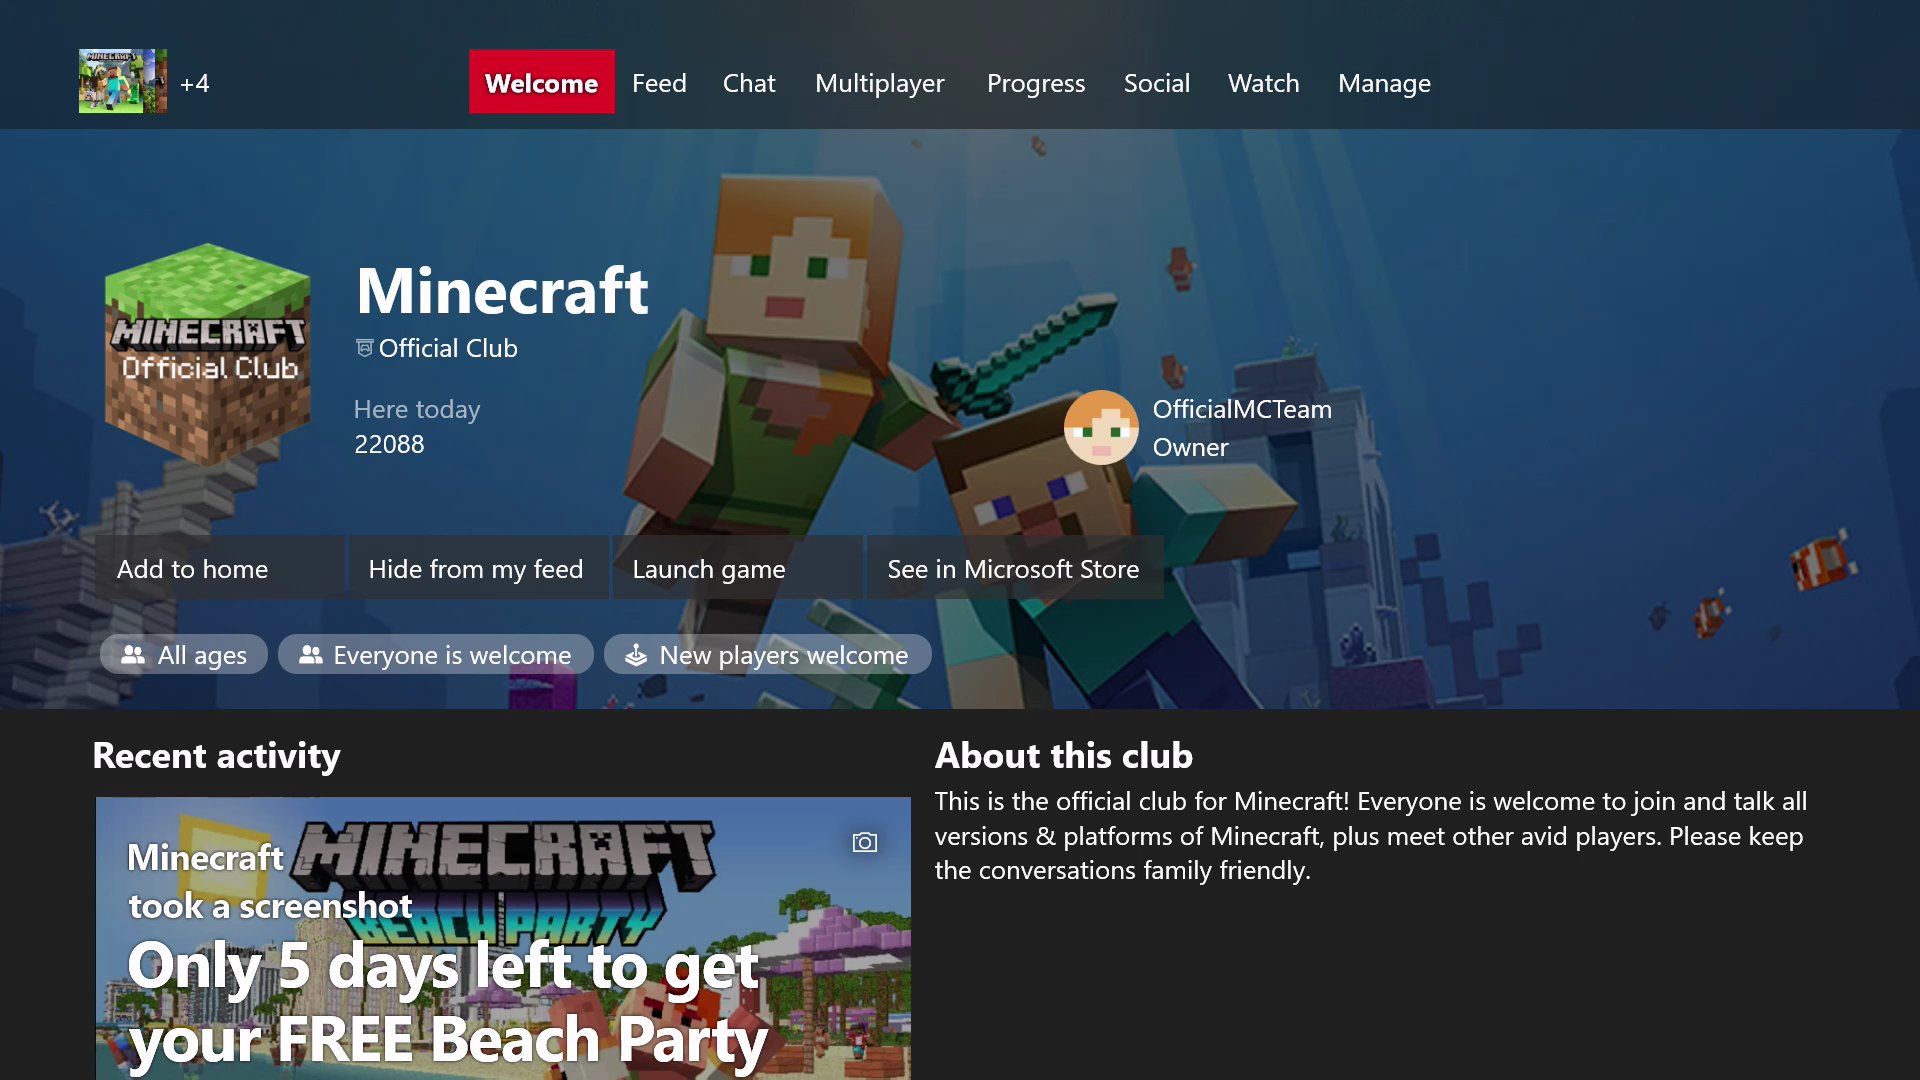 Minecraft on Twitter "We now have an official Minecraft